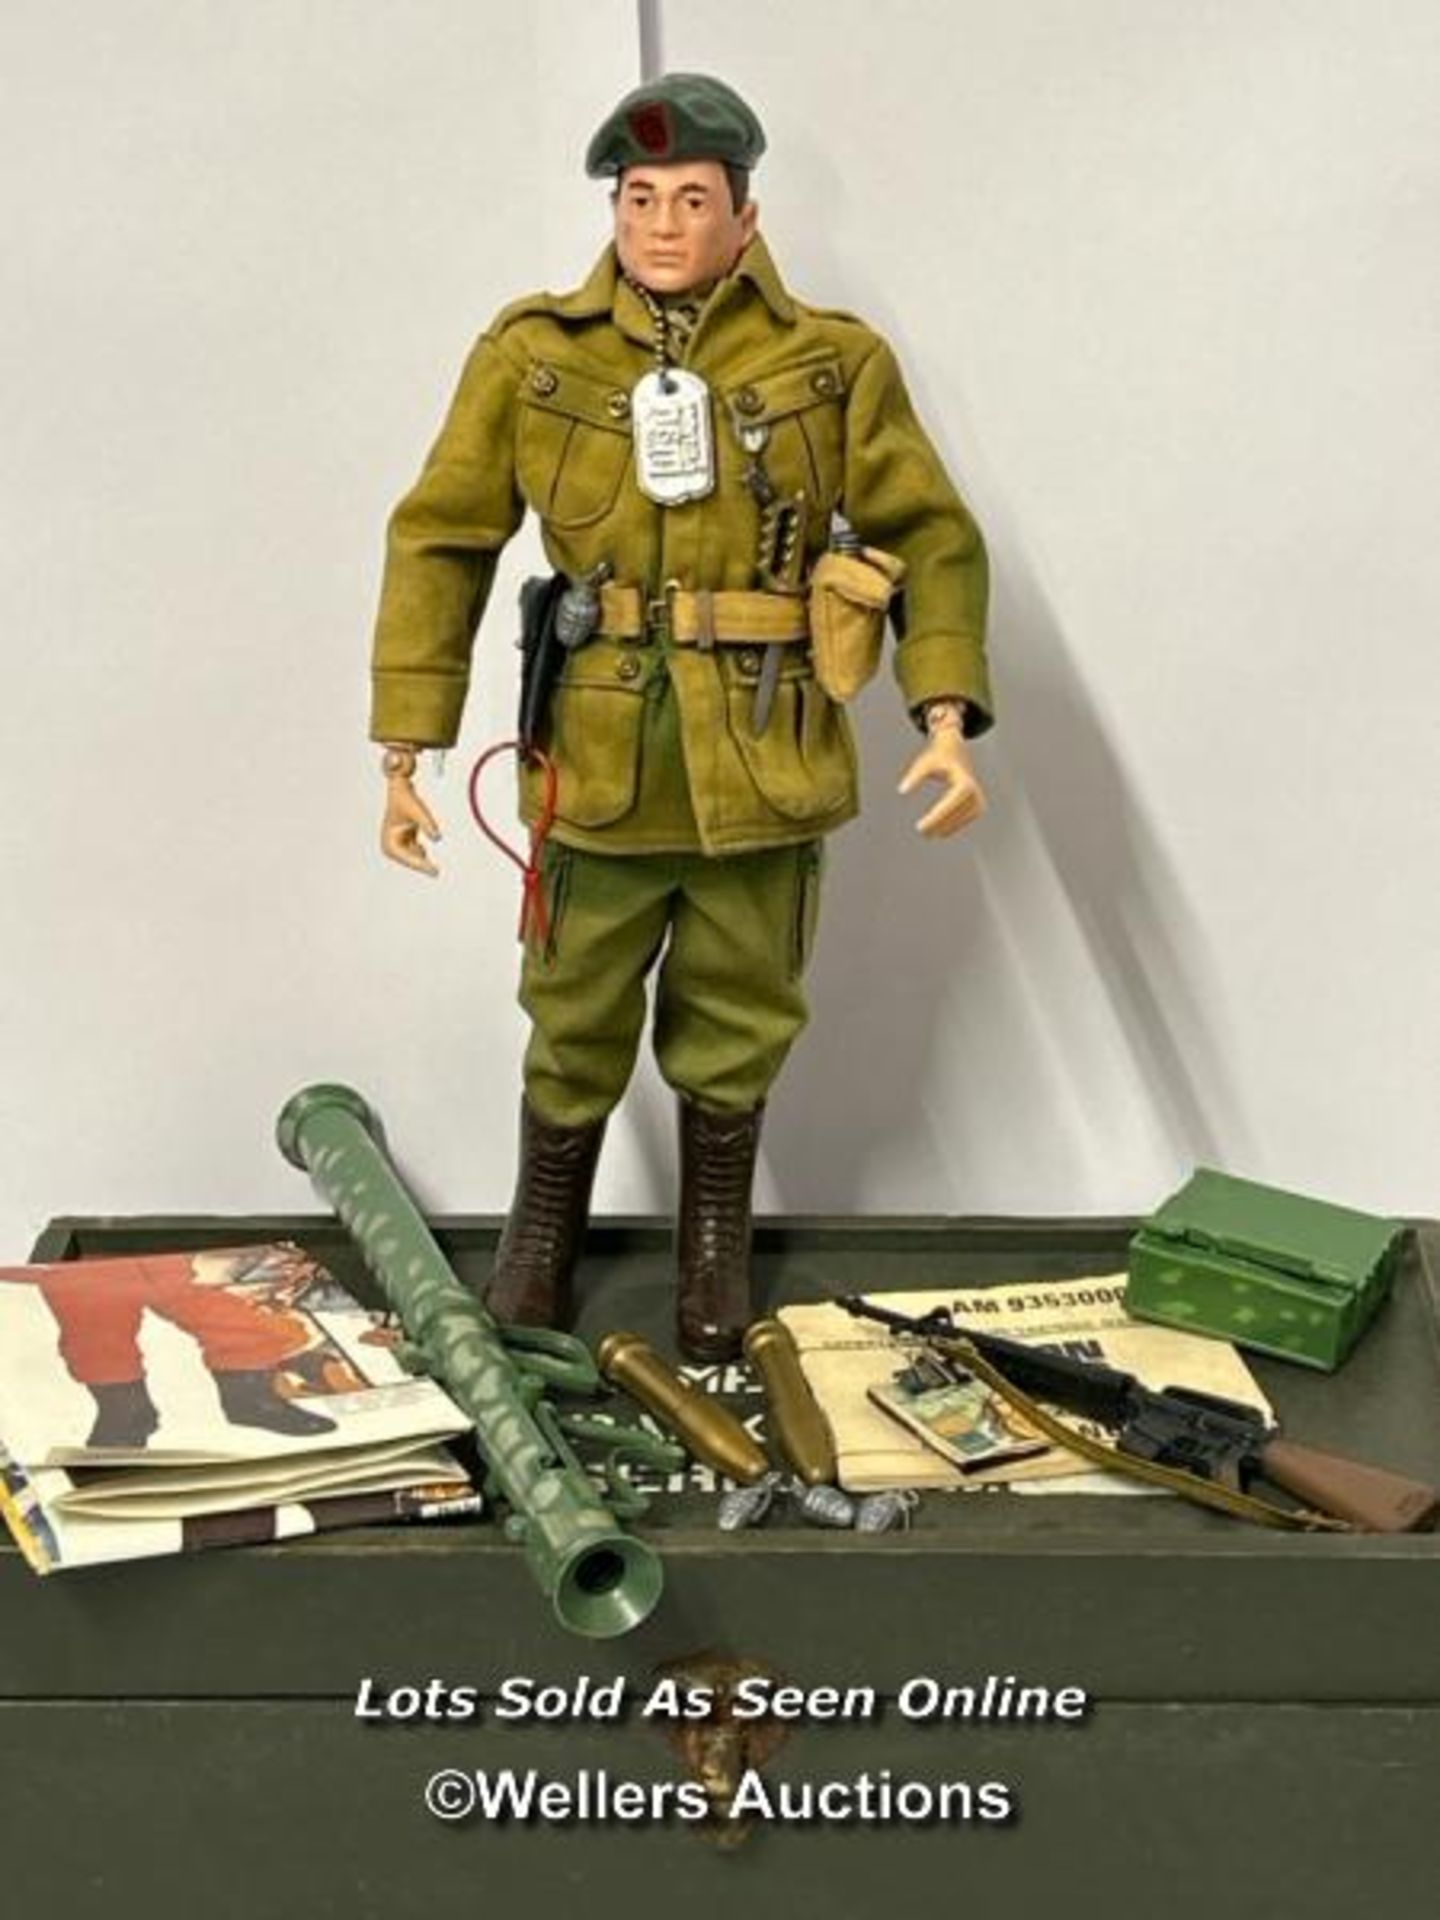 A 1964 Palitoy Action Man figure in American Green Beret fatigues and a wooden kit locker, Palitoy